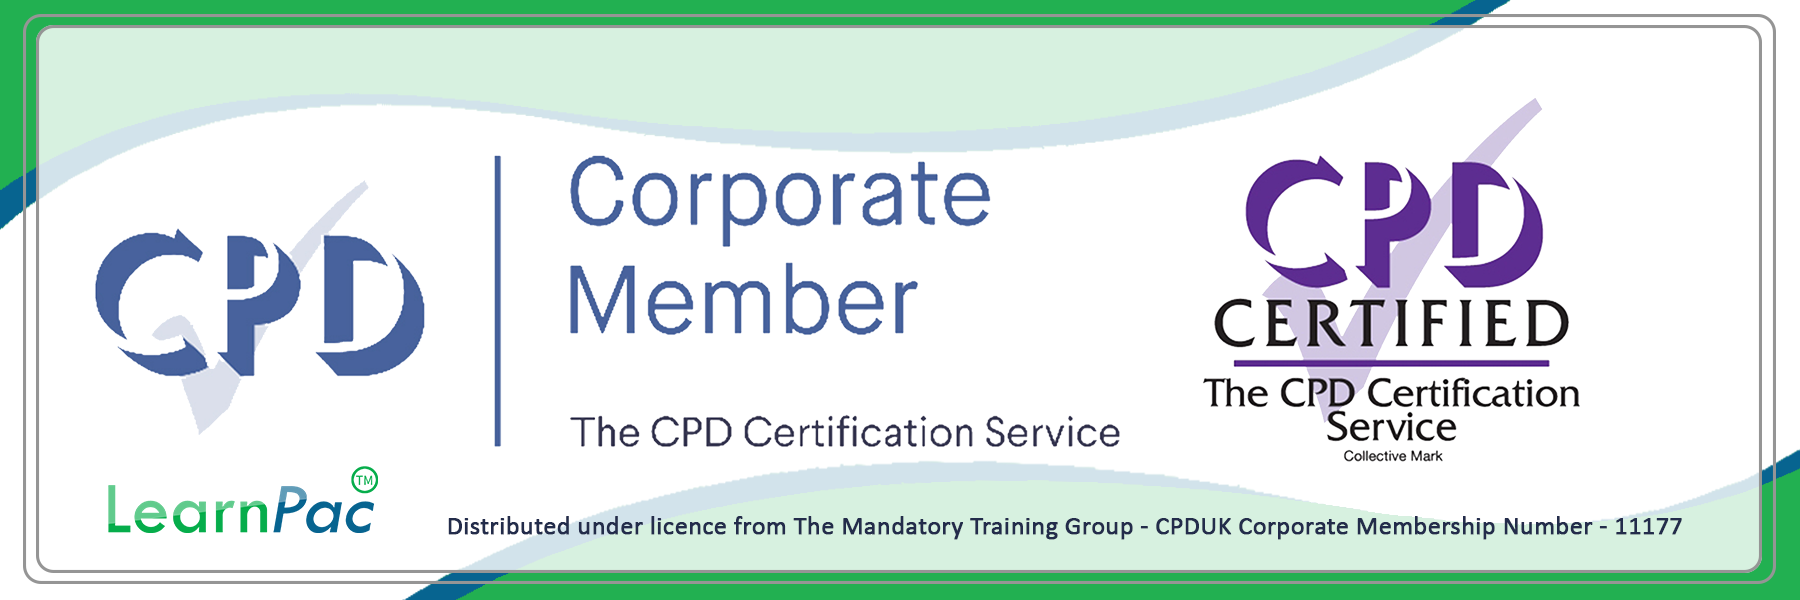 Care Training - E-Learning Courses with Certificates - CPD Certified - LearnPac Systems UK -